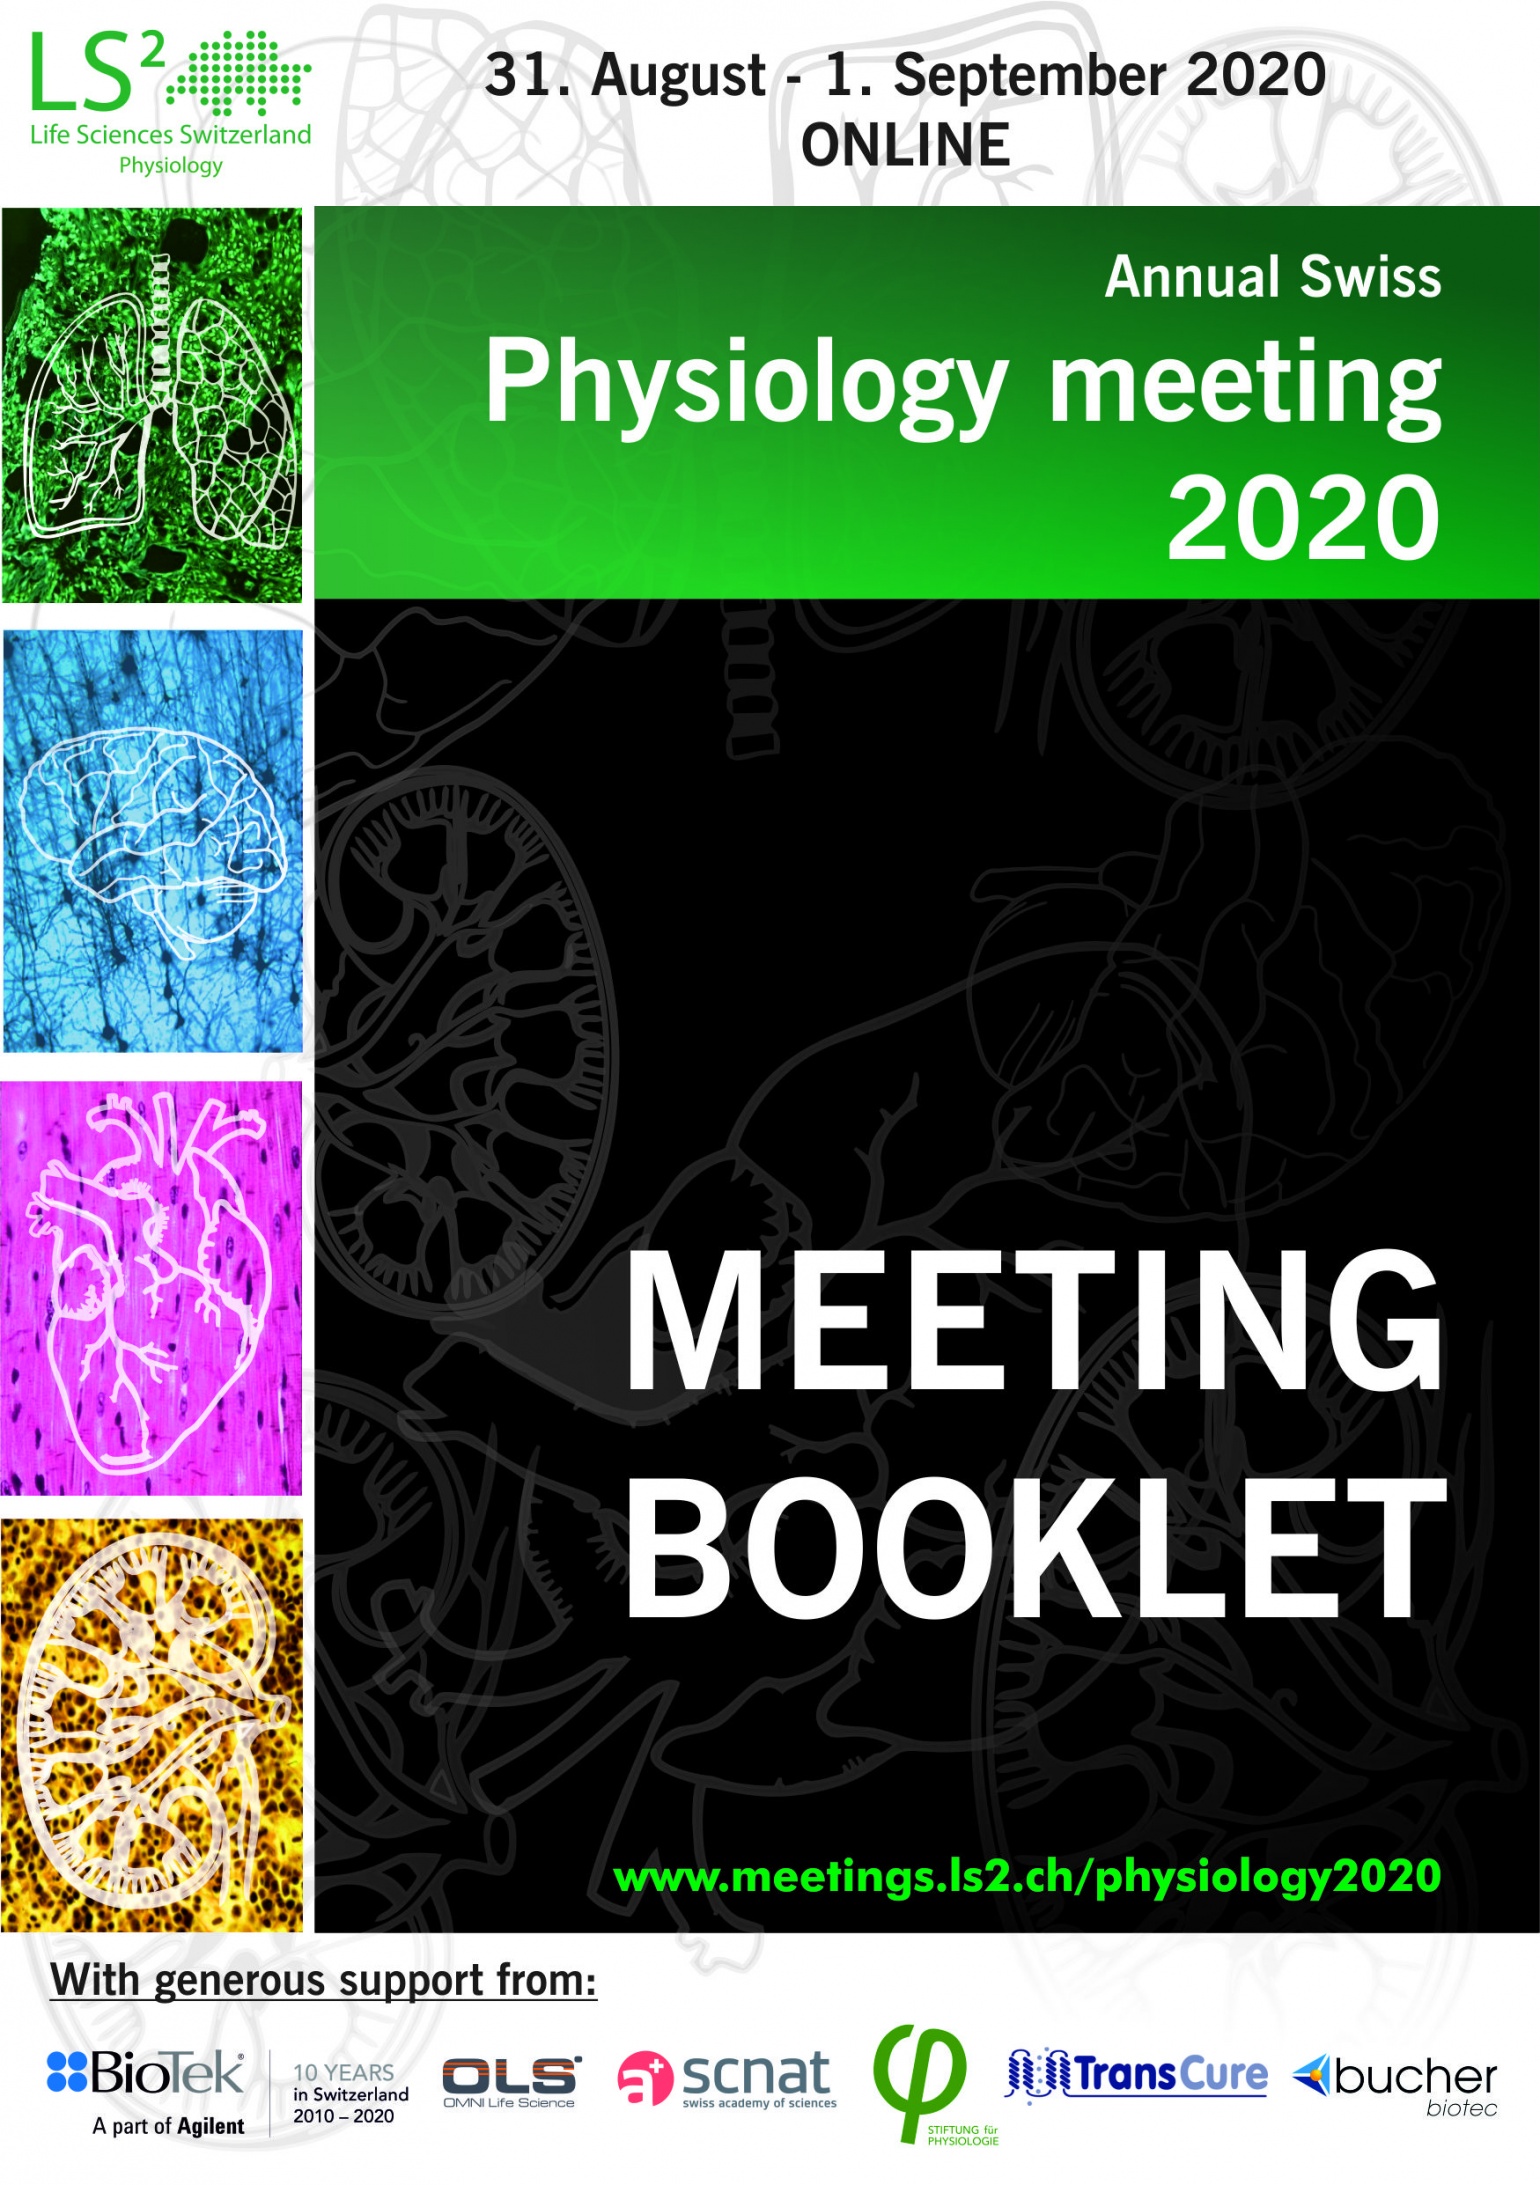 booklet-front-physio-2020_1540x 3 Short Stories You Didn't Know About what is .hnc on my phone